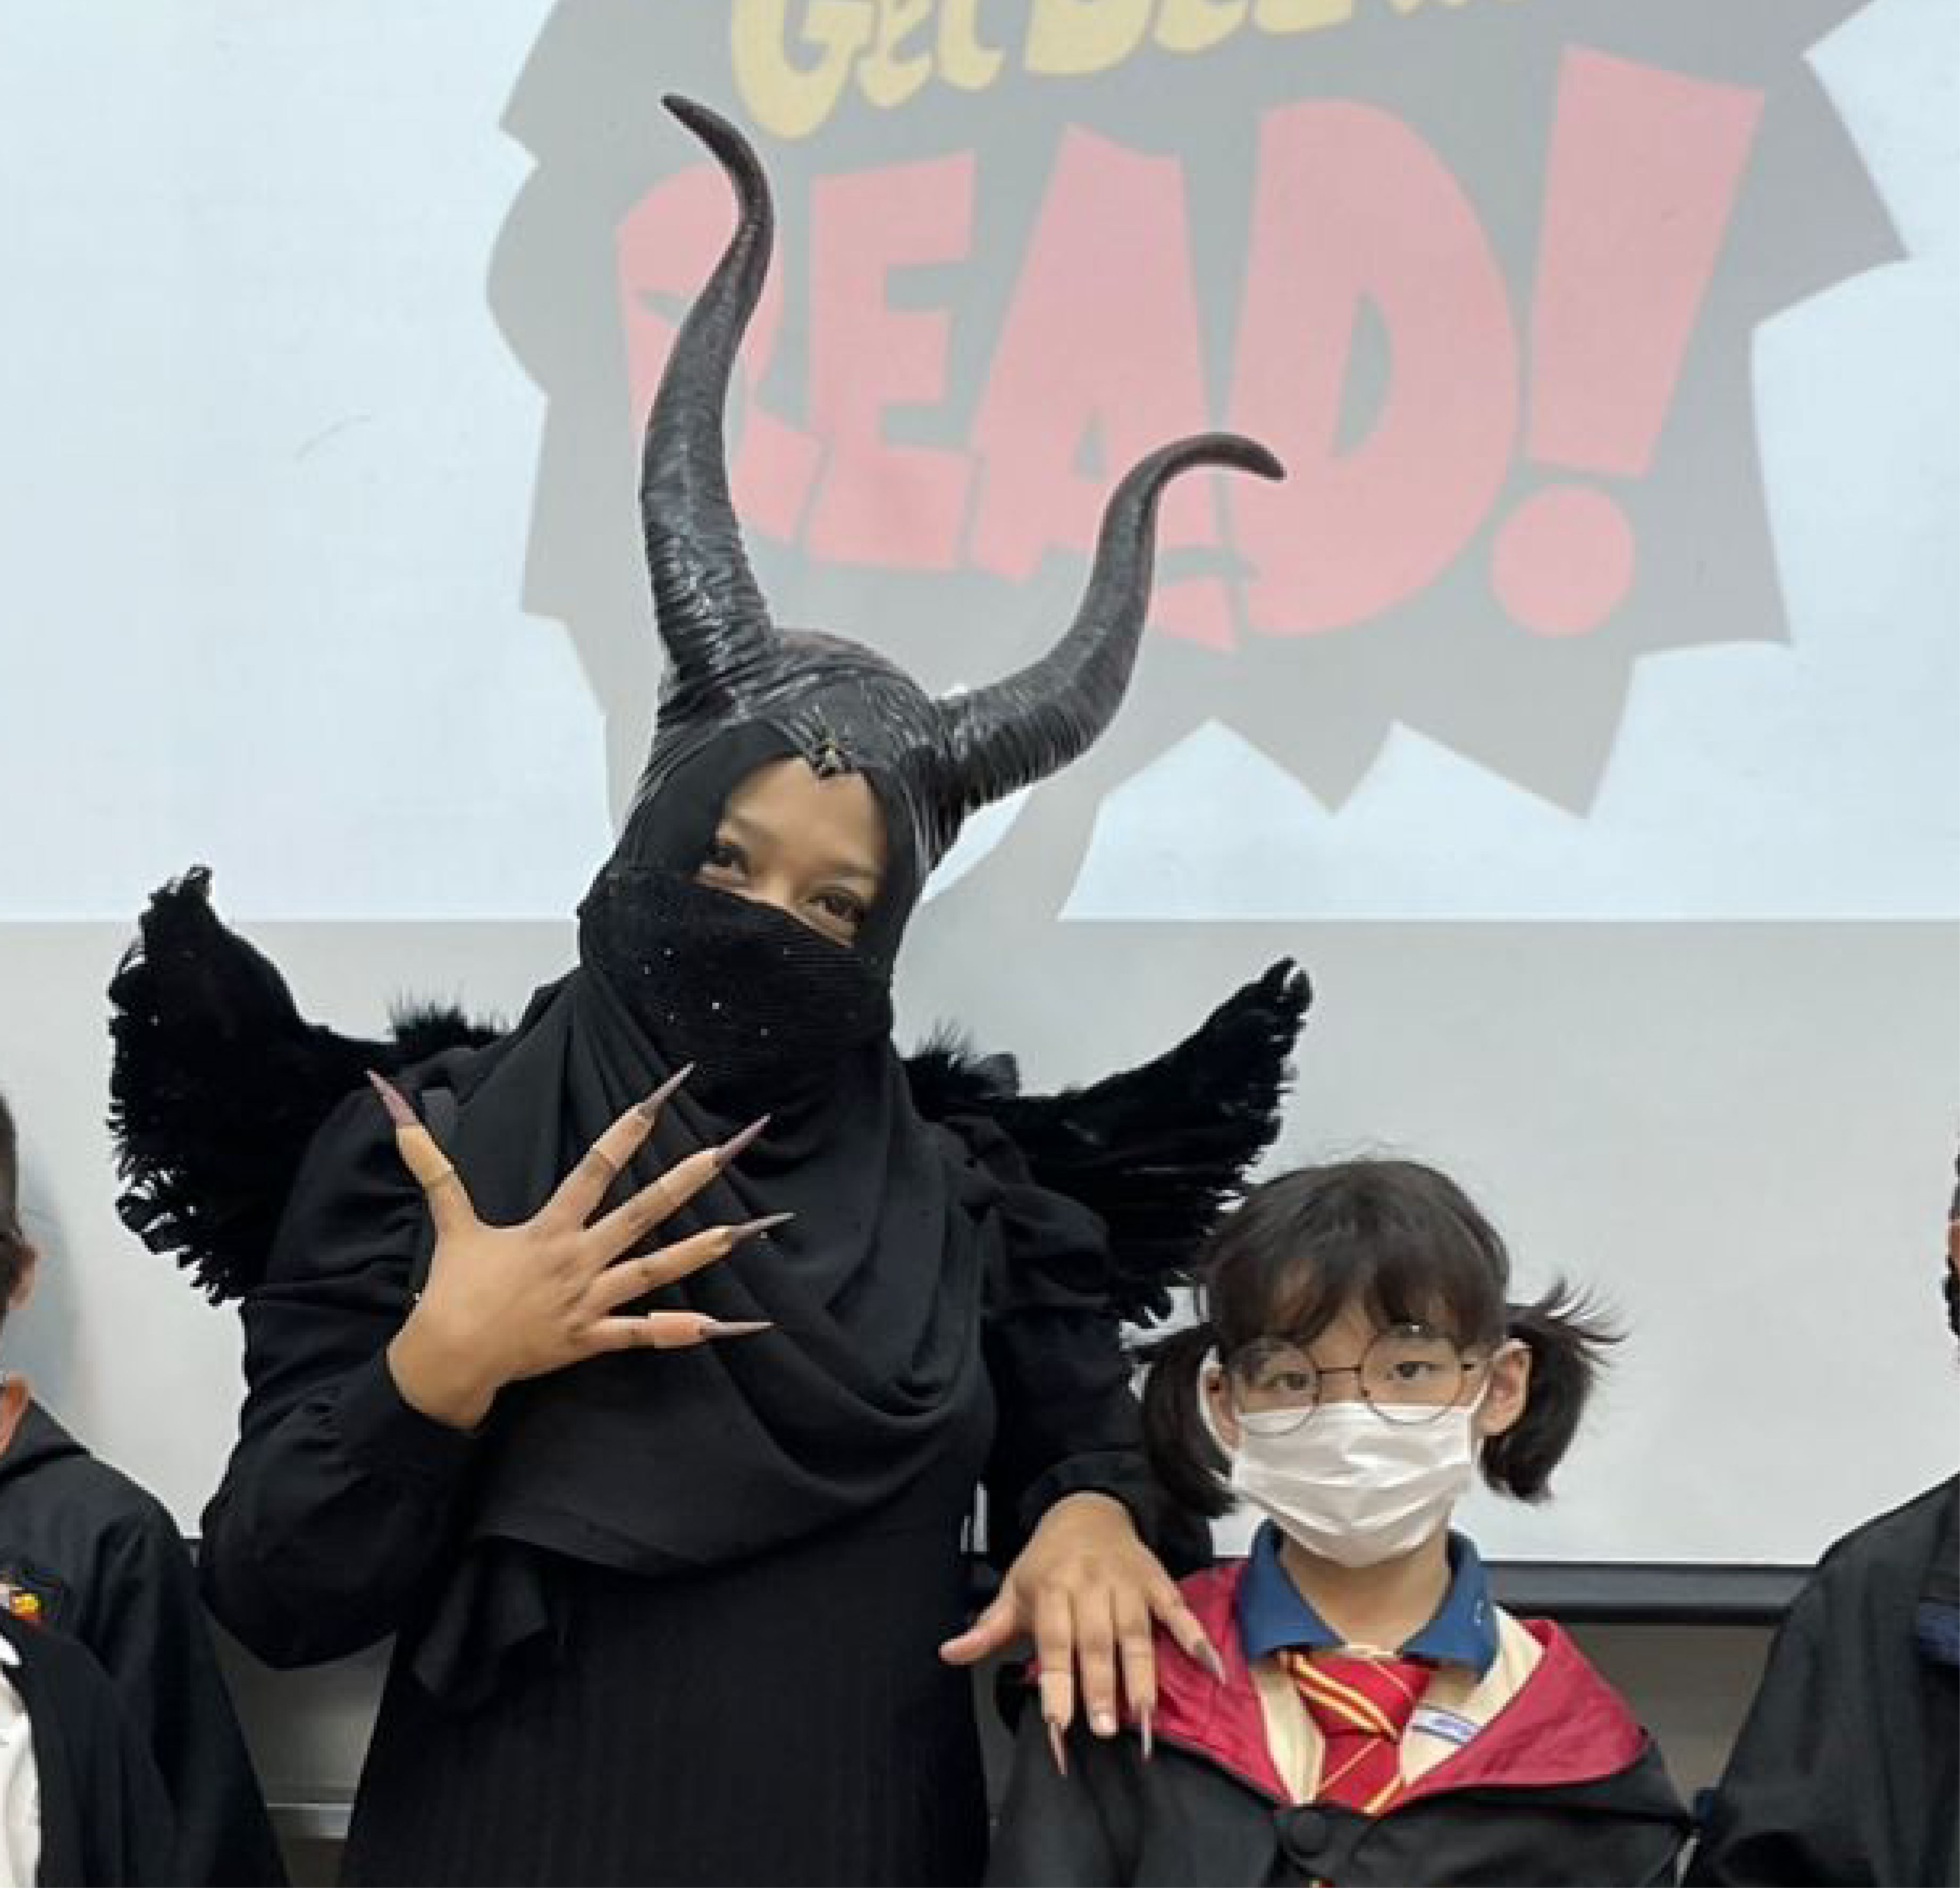 The writer’s daughter dressed up as Harry Potter, with her English teacher Mdm Noor Rita dressed as Maleficent, for Reading Week at school. Photo: Mdm Noor Rita
